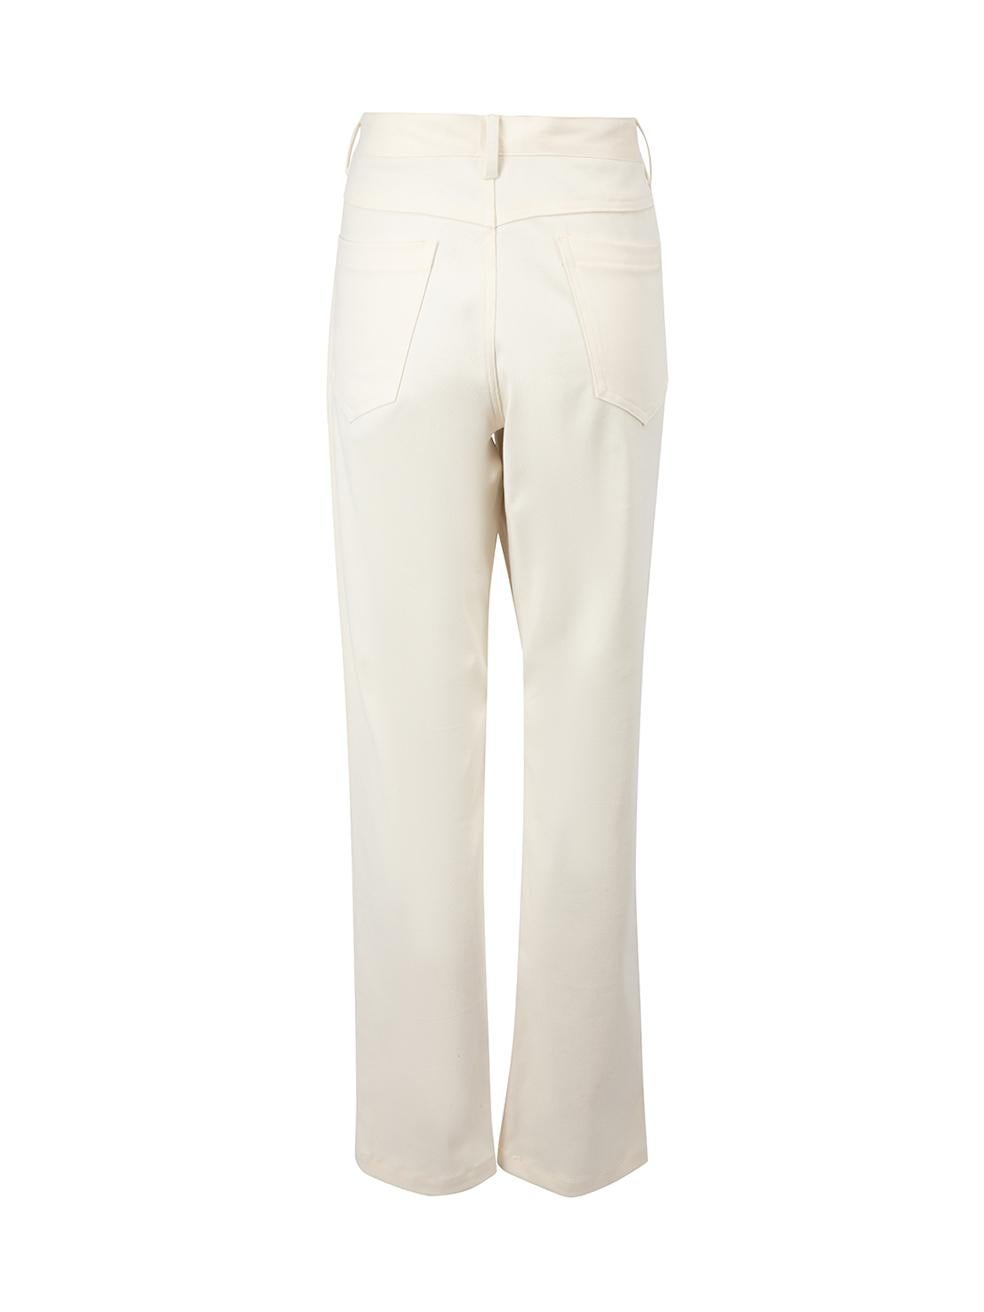 Sanne Women's Cream Wool Straight Leg Trousers In Good Condition For Sale In London, GB